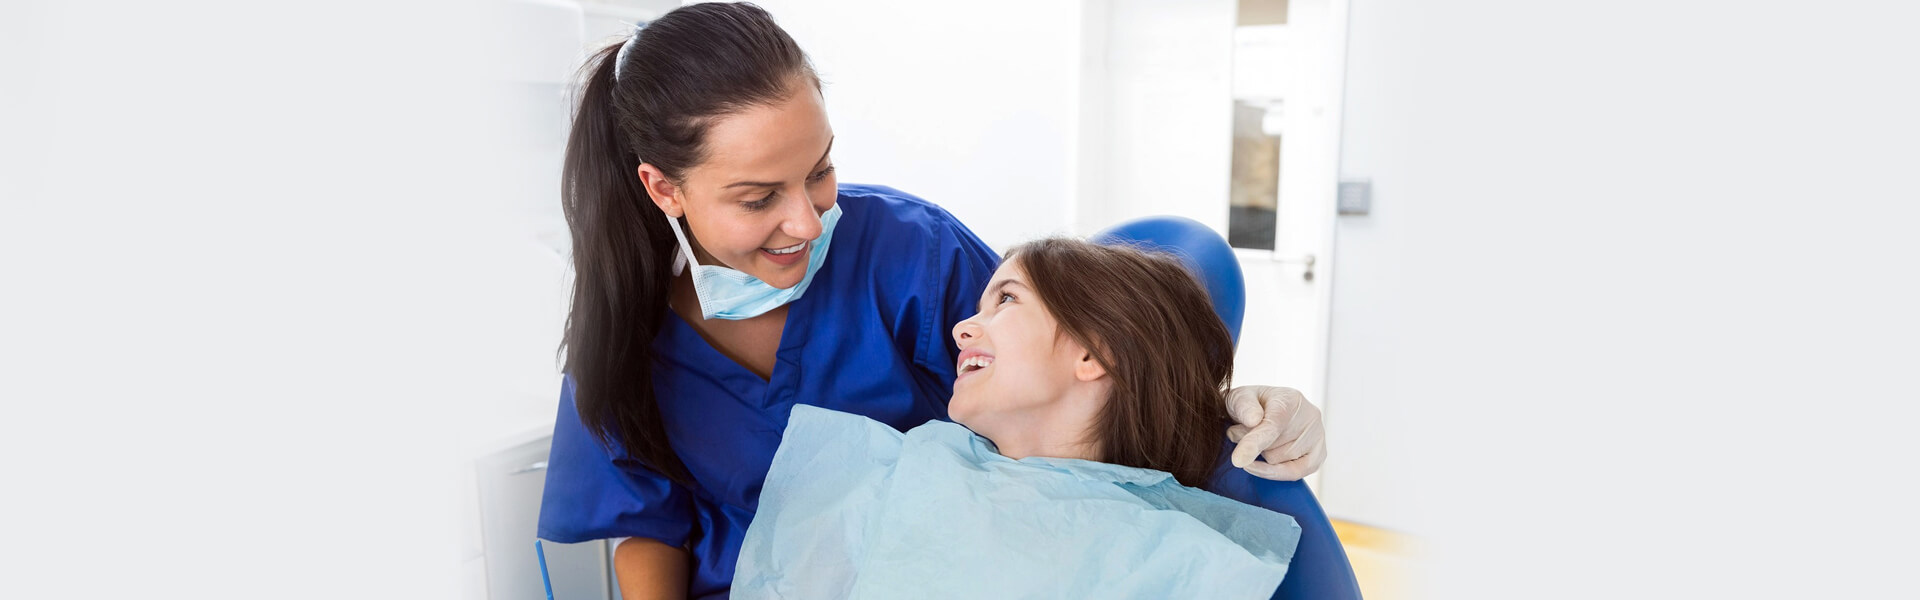 5 Tips for Choosing a Pediatric Dentist for Your Child